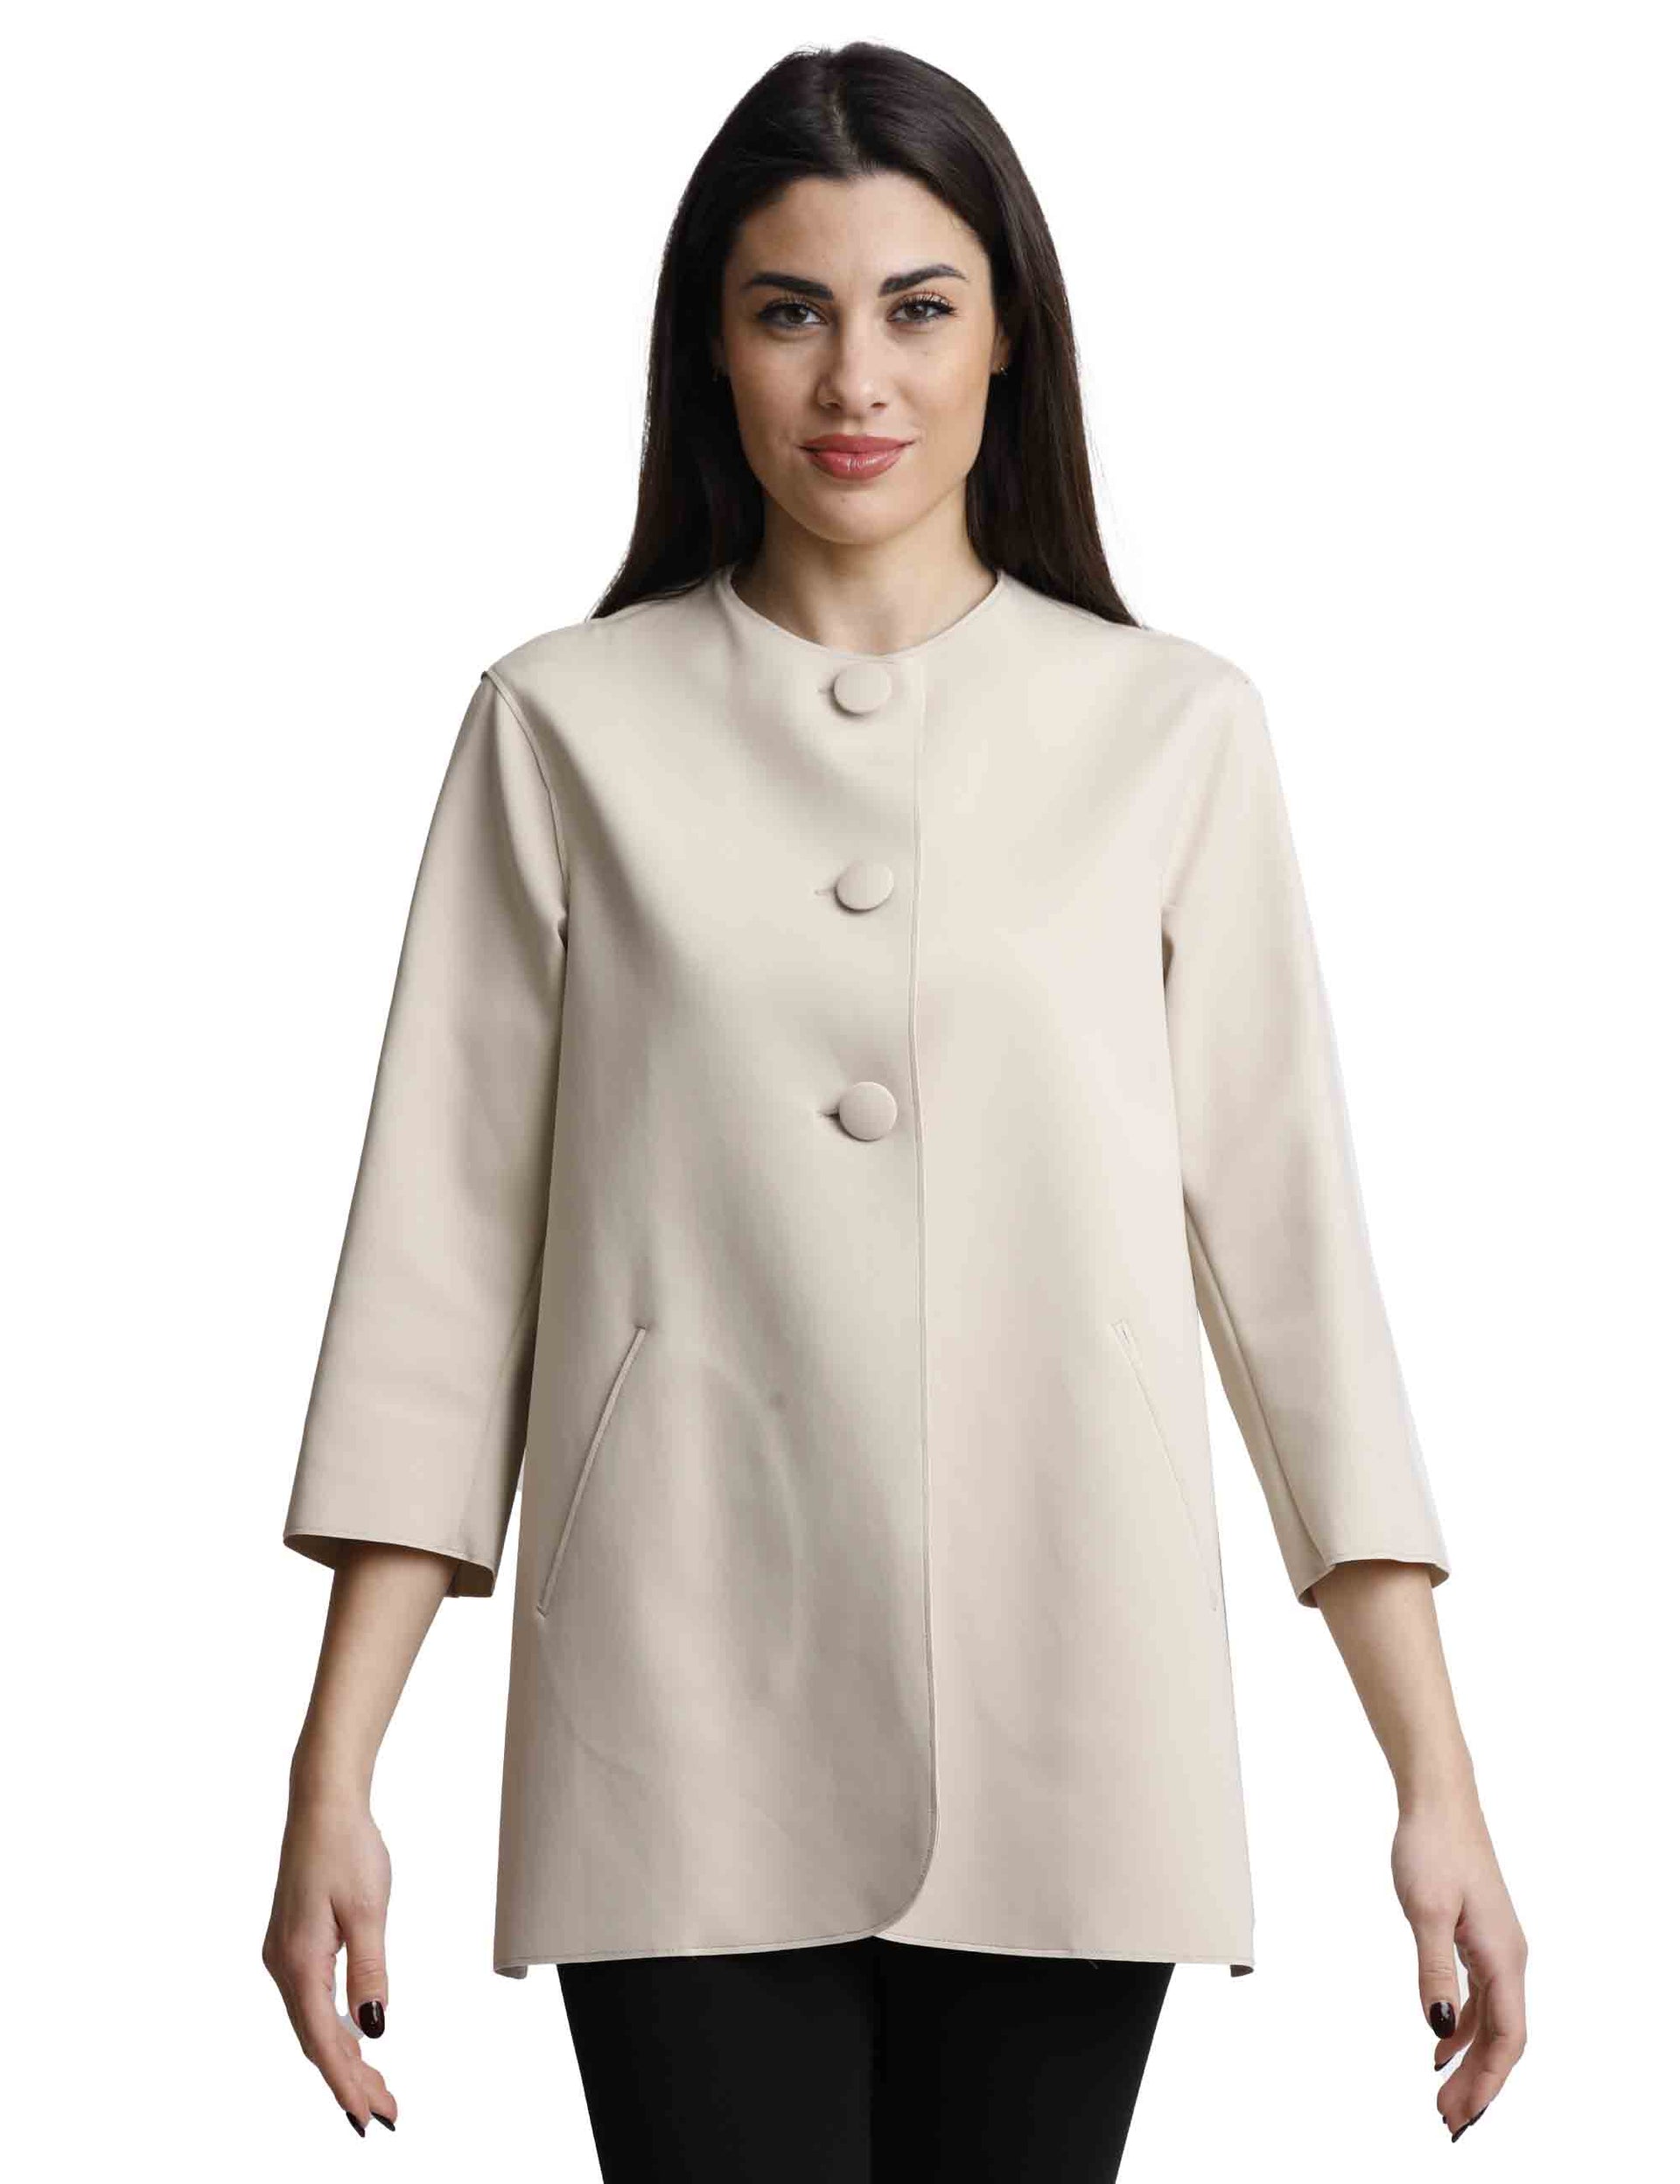 Aria women's jackets in beige fabric with crew neckline and 3/4 sleeves